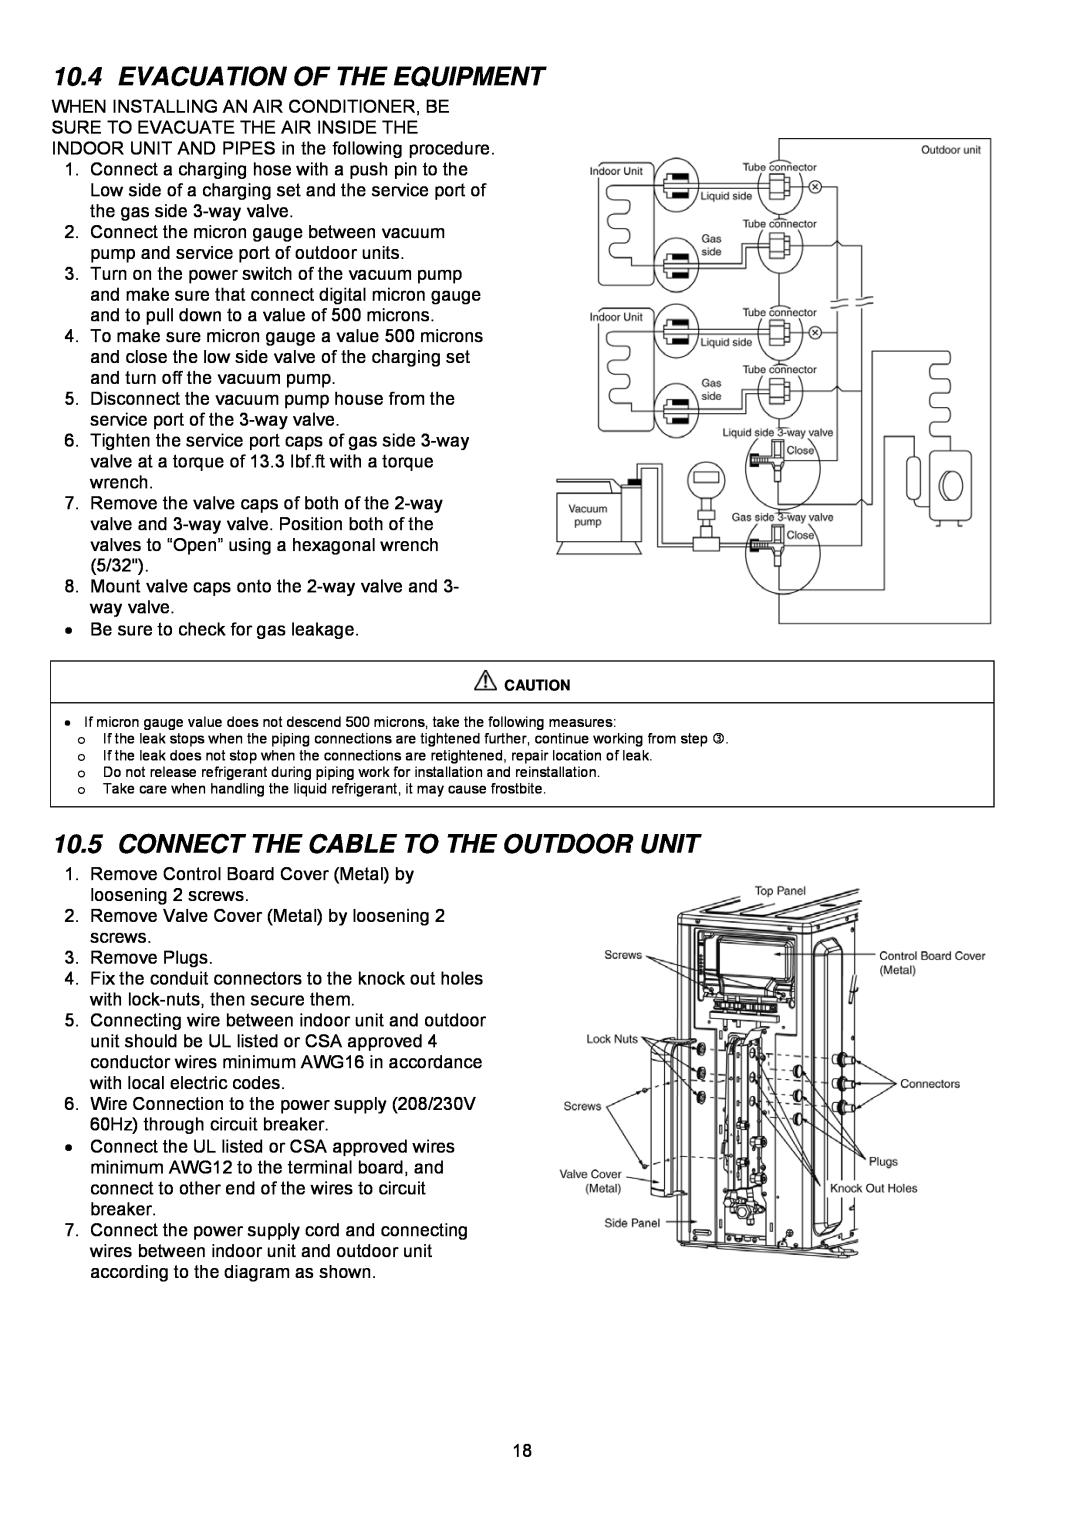 Panasonic CU-2S18NBU-1 service manual Evacuation Of The Equipment, Connect The Cable To The Outdoor Unit 